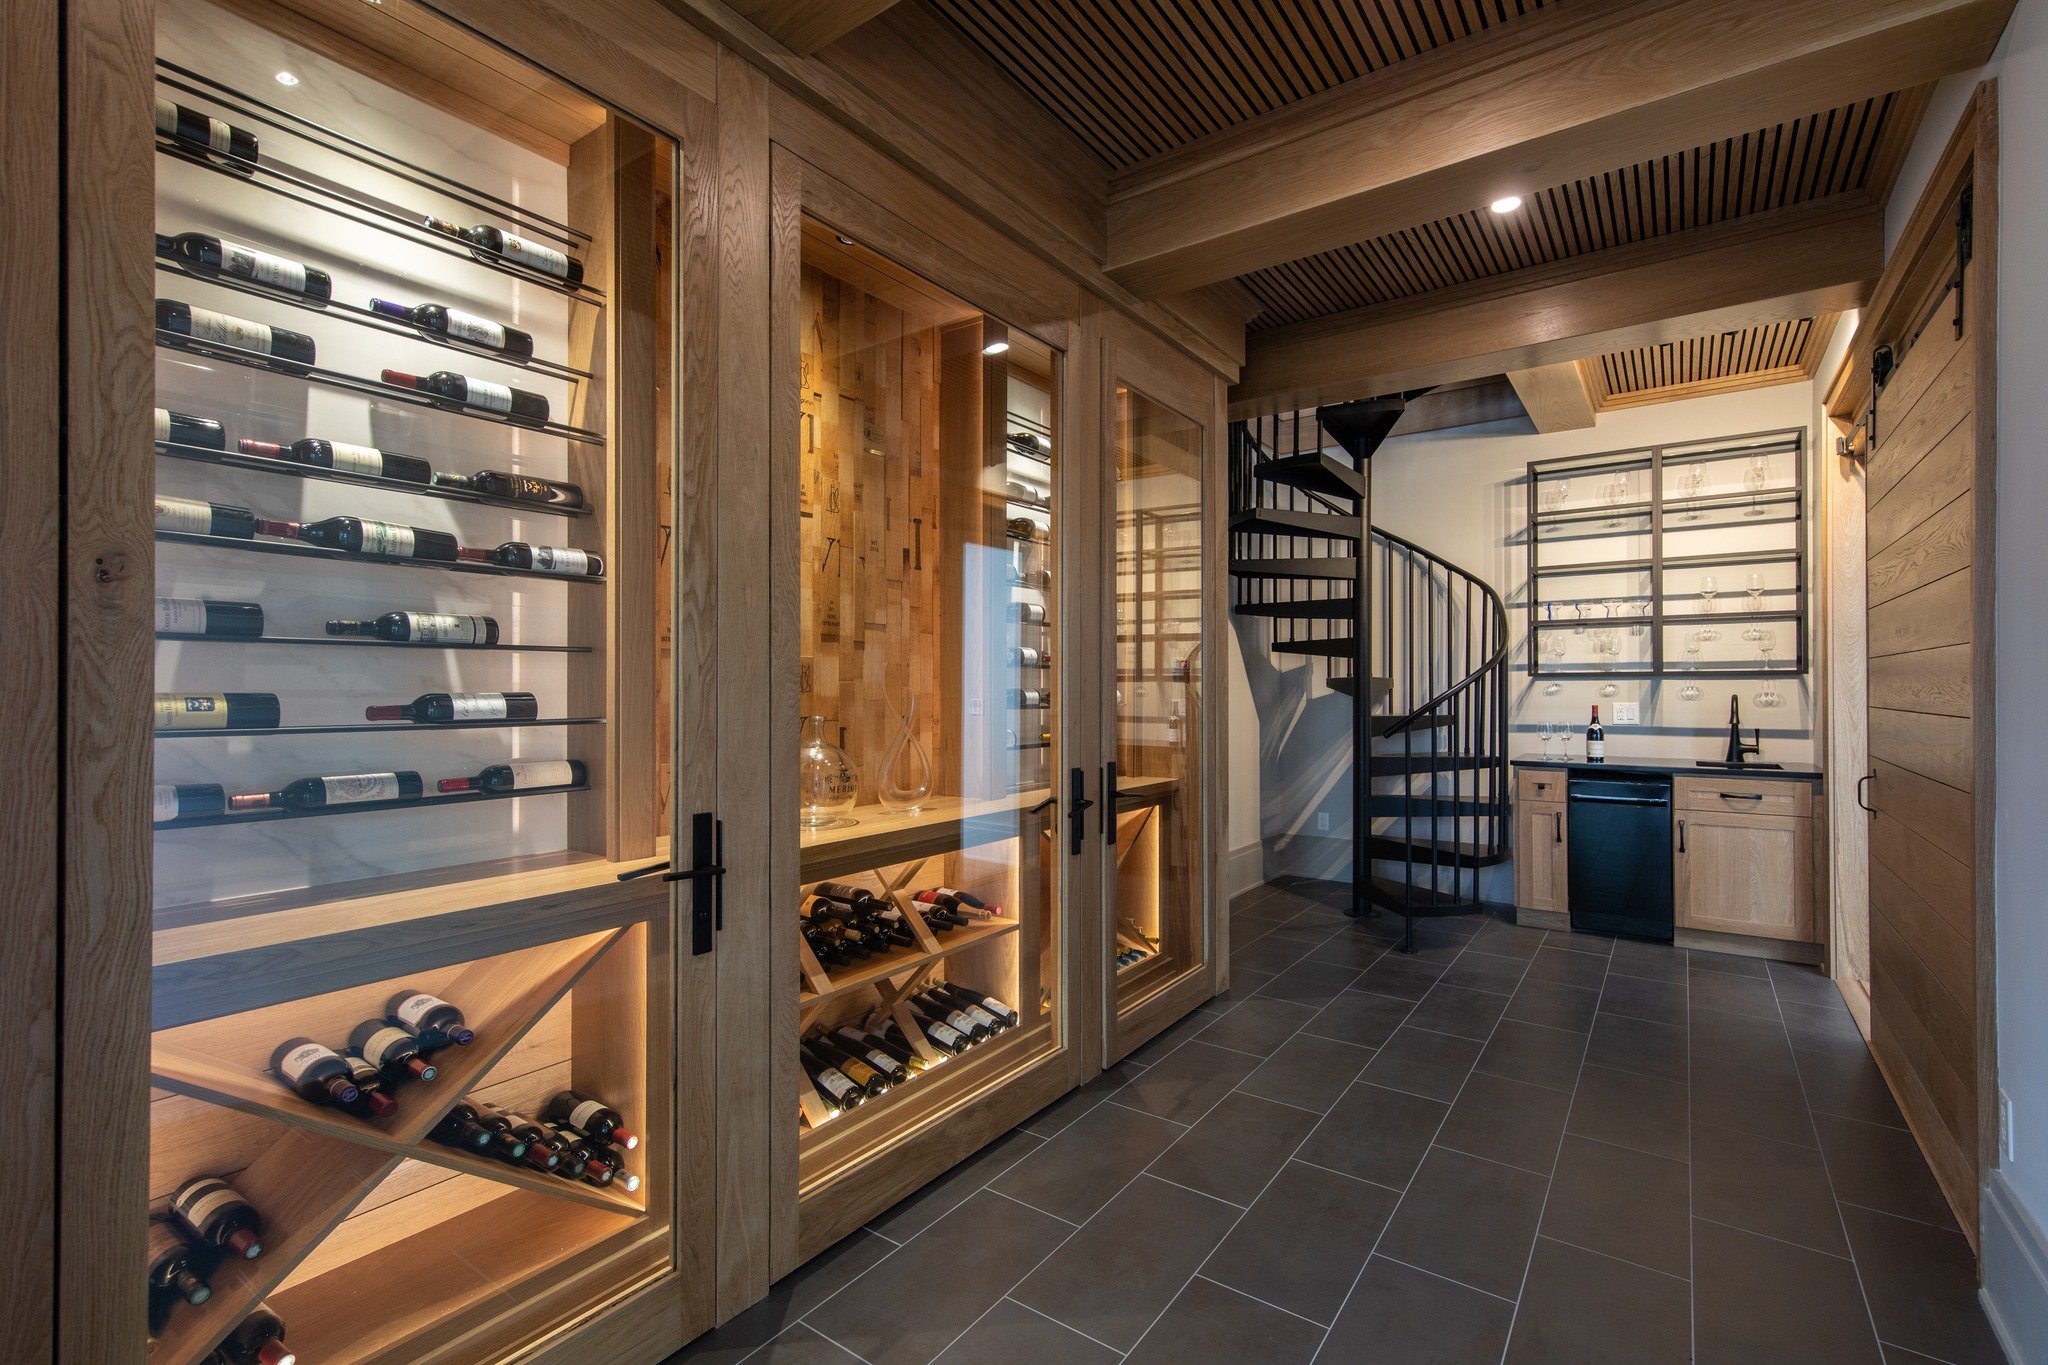 Anyone else have wine cellar envy?!!? We are wildly impressed with this 🍷cellar and are consistently thrilled by where our job takes us ✨
_
📸: @atlantic_exposure